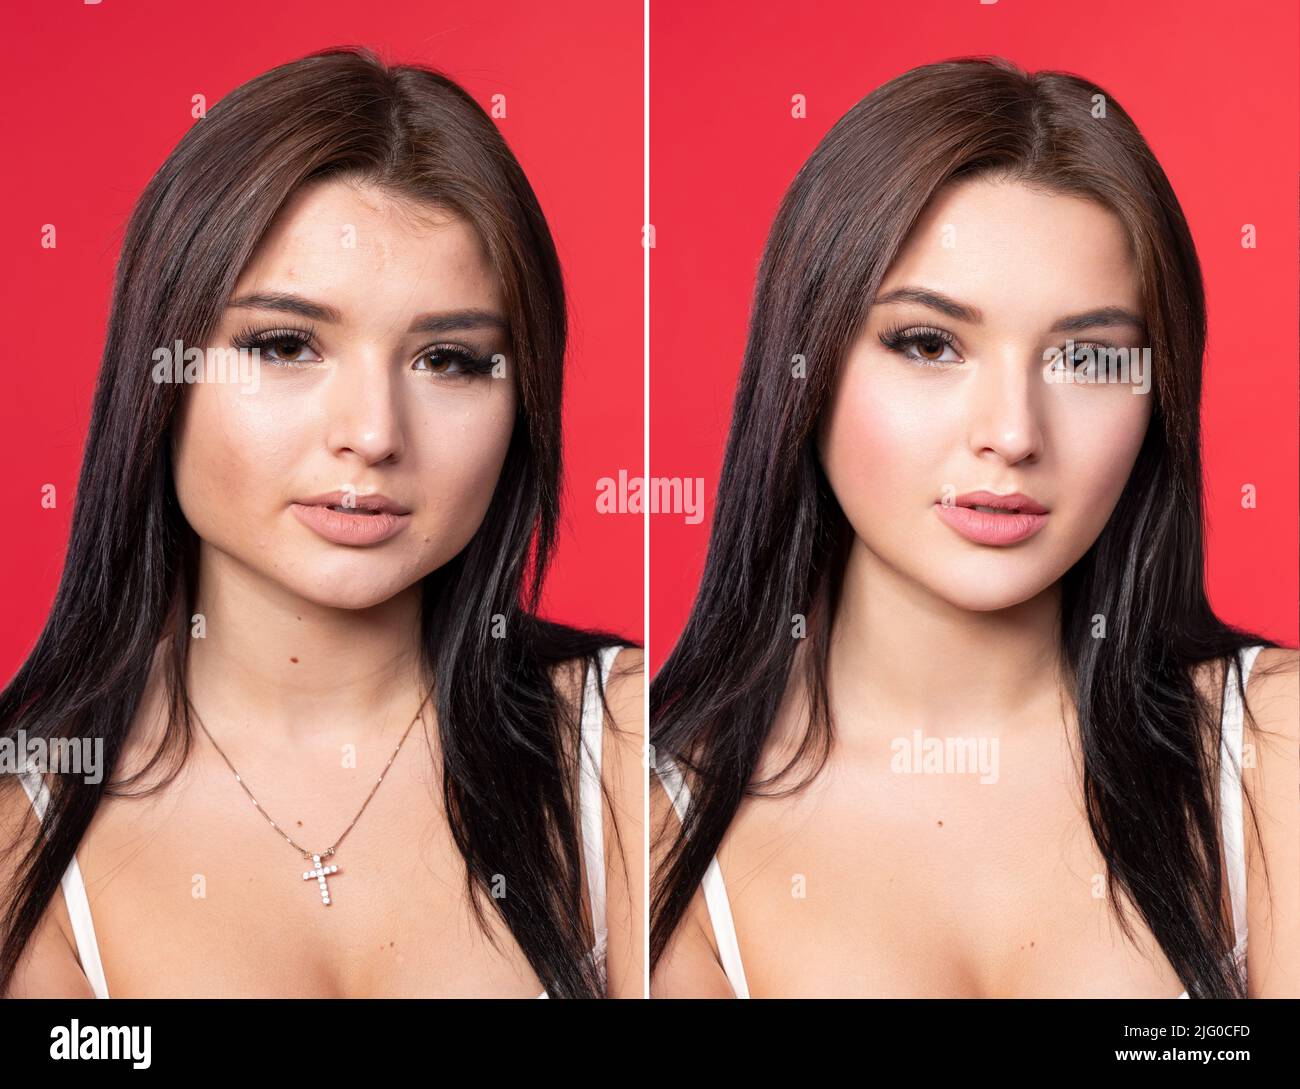 Photo before and after retouch. Beautiful brunette on a red background. The work of a retoucher in Photoshop. Concept editing, photo retouching. Stock Photo